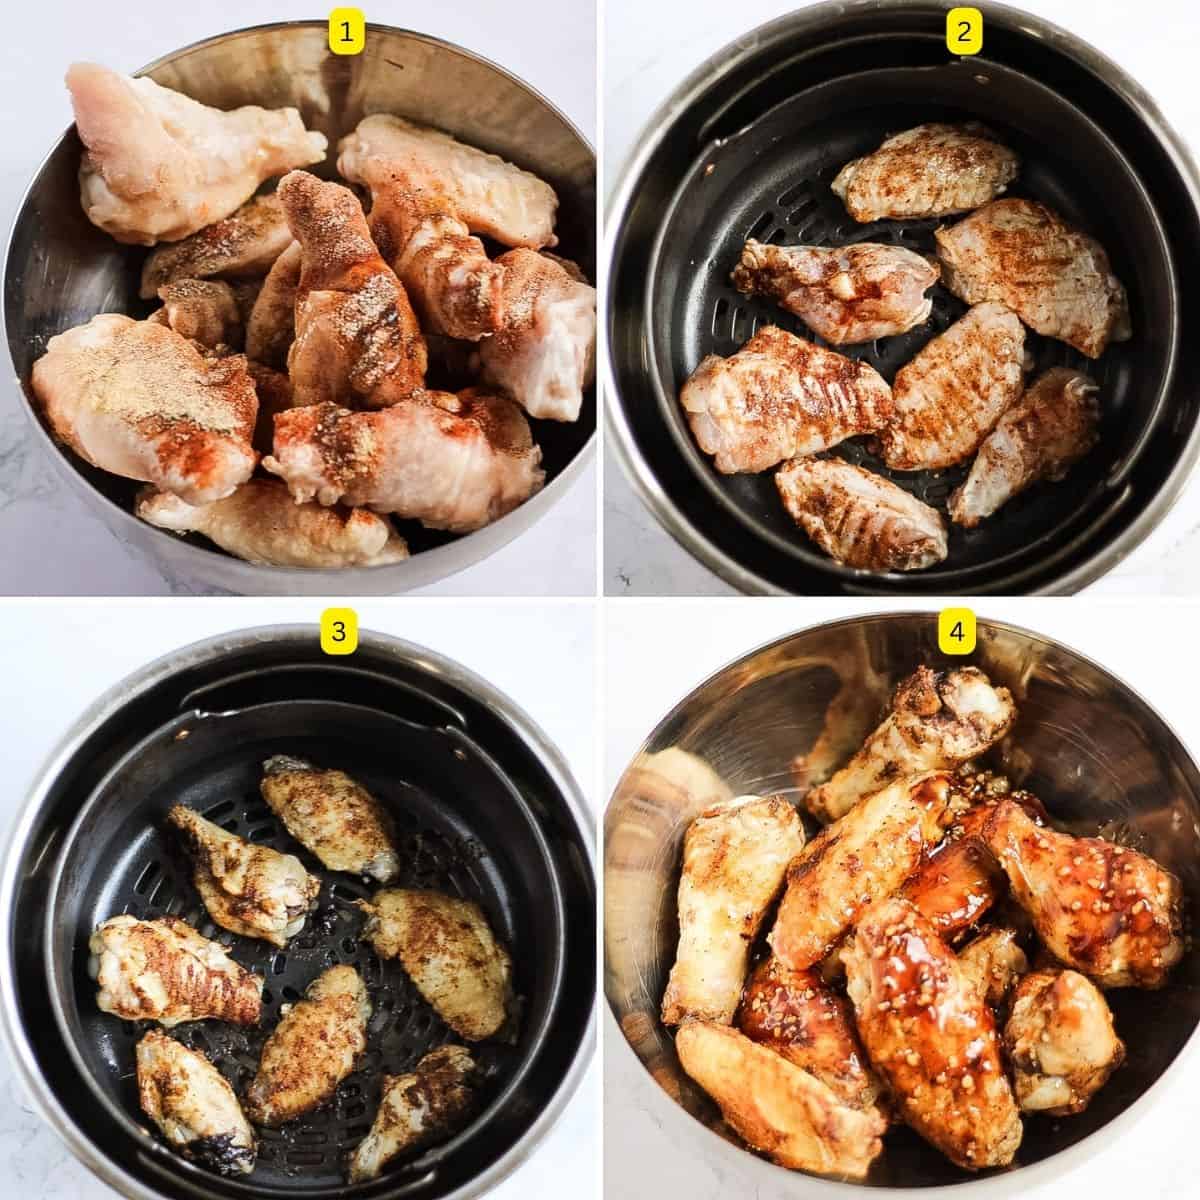 Step-by-step procedure on how to cook chicken wings.